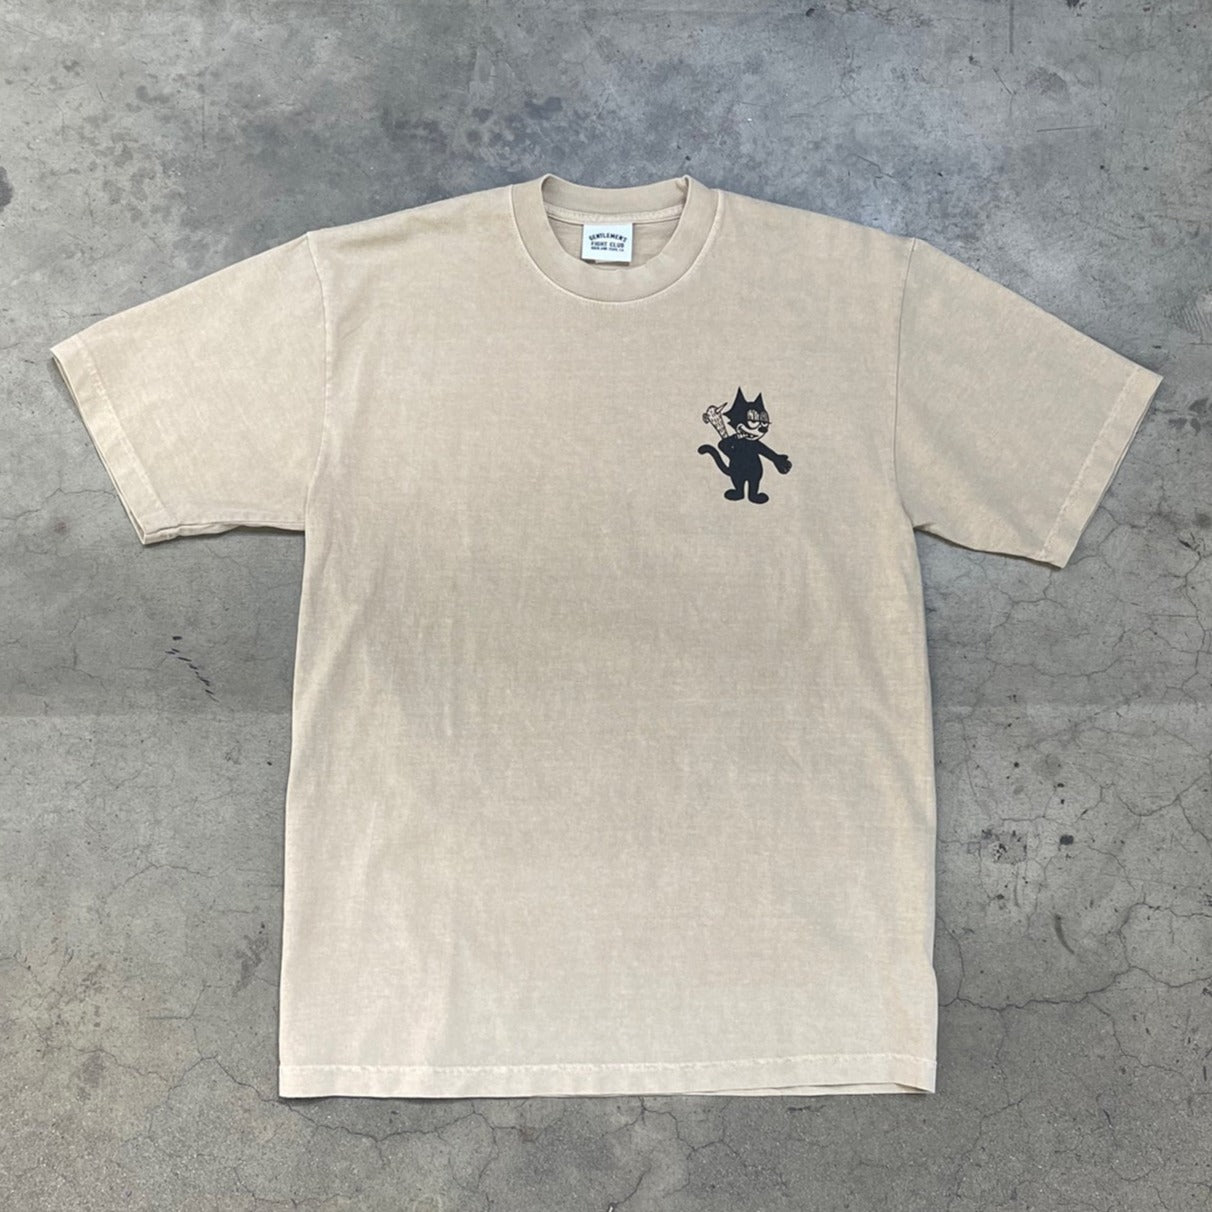 Front of light brown tee with same cat as the back